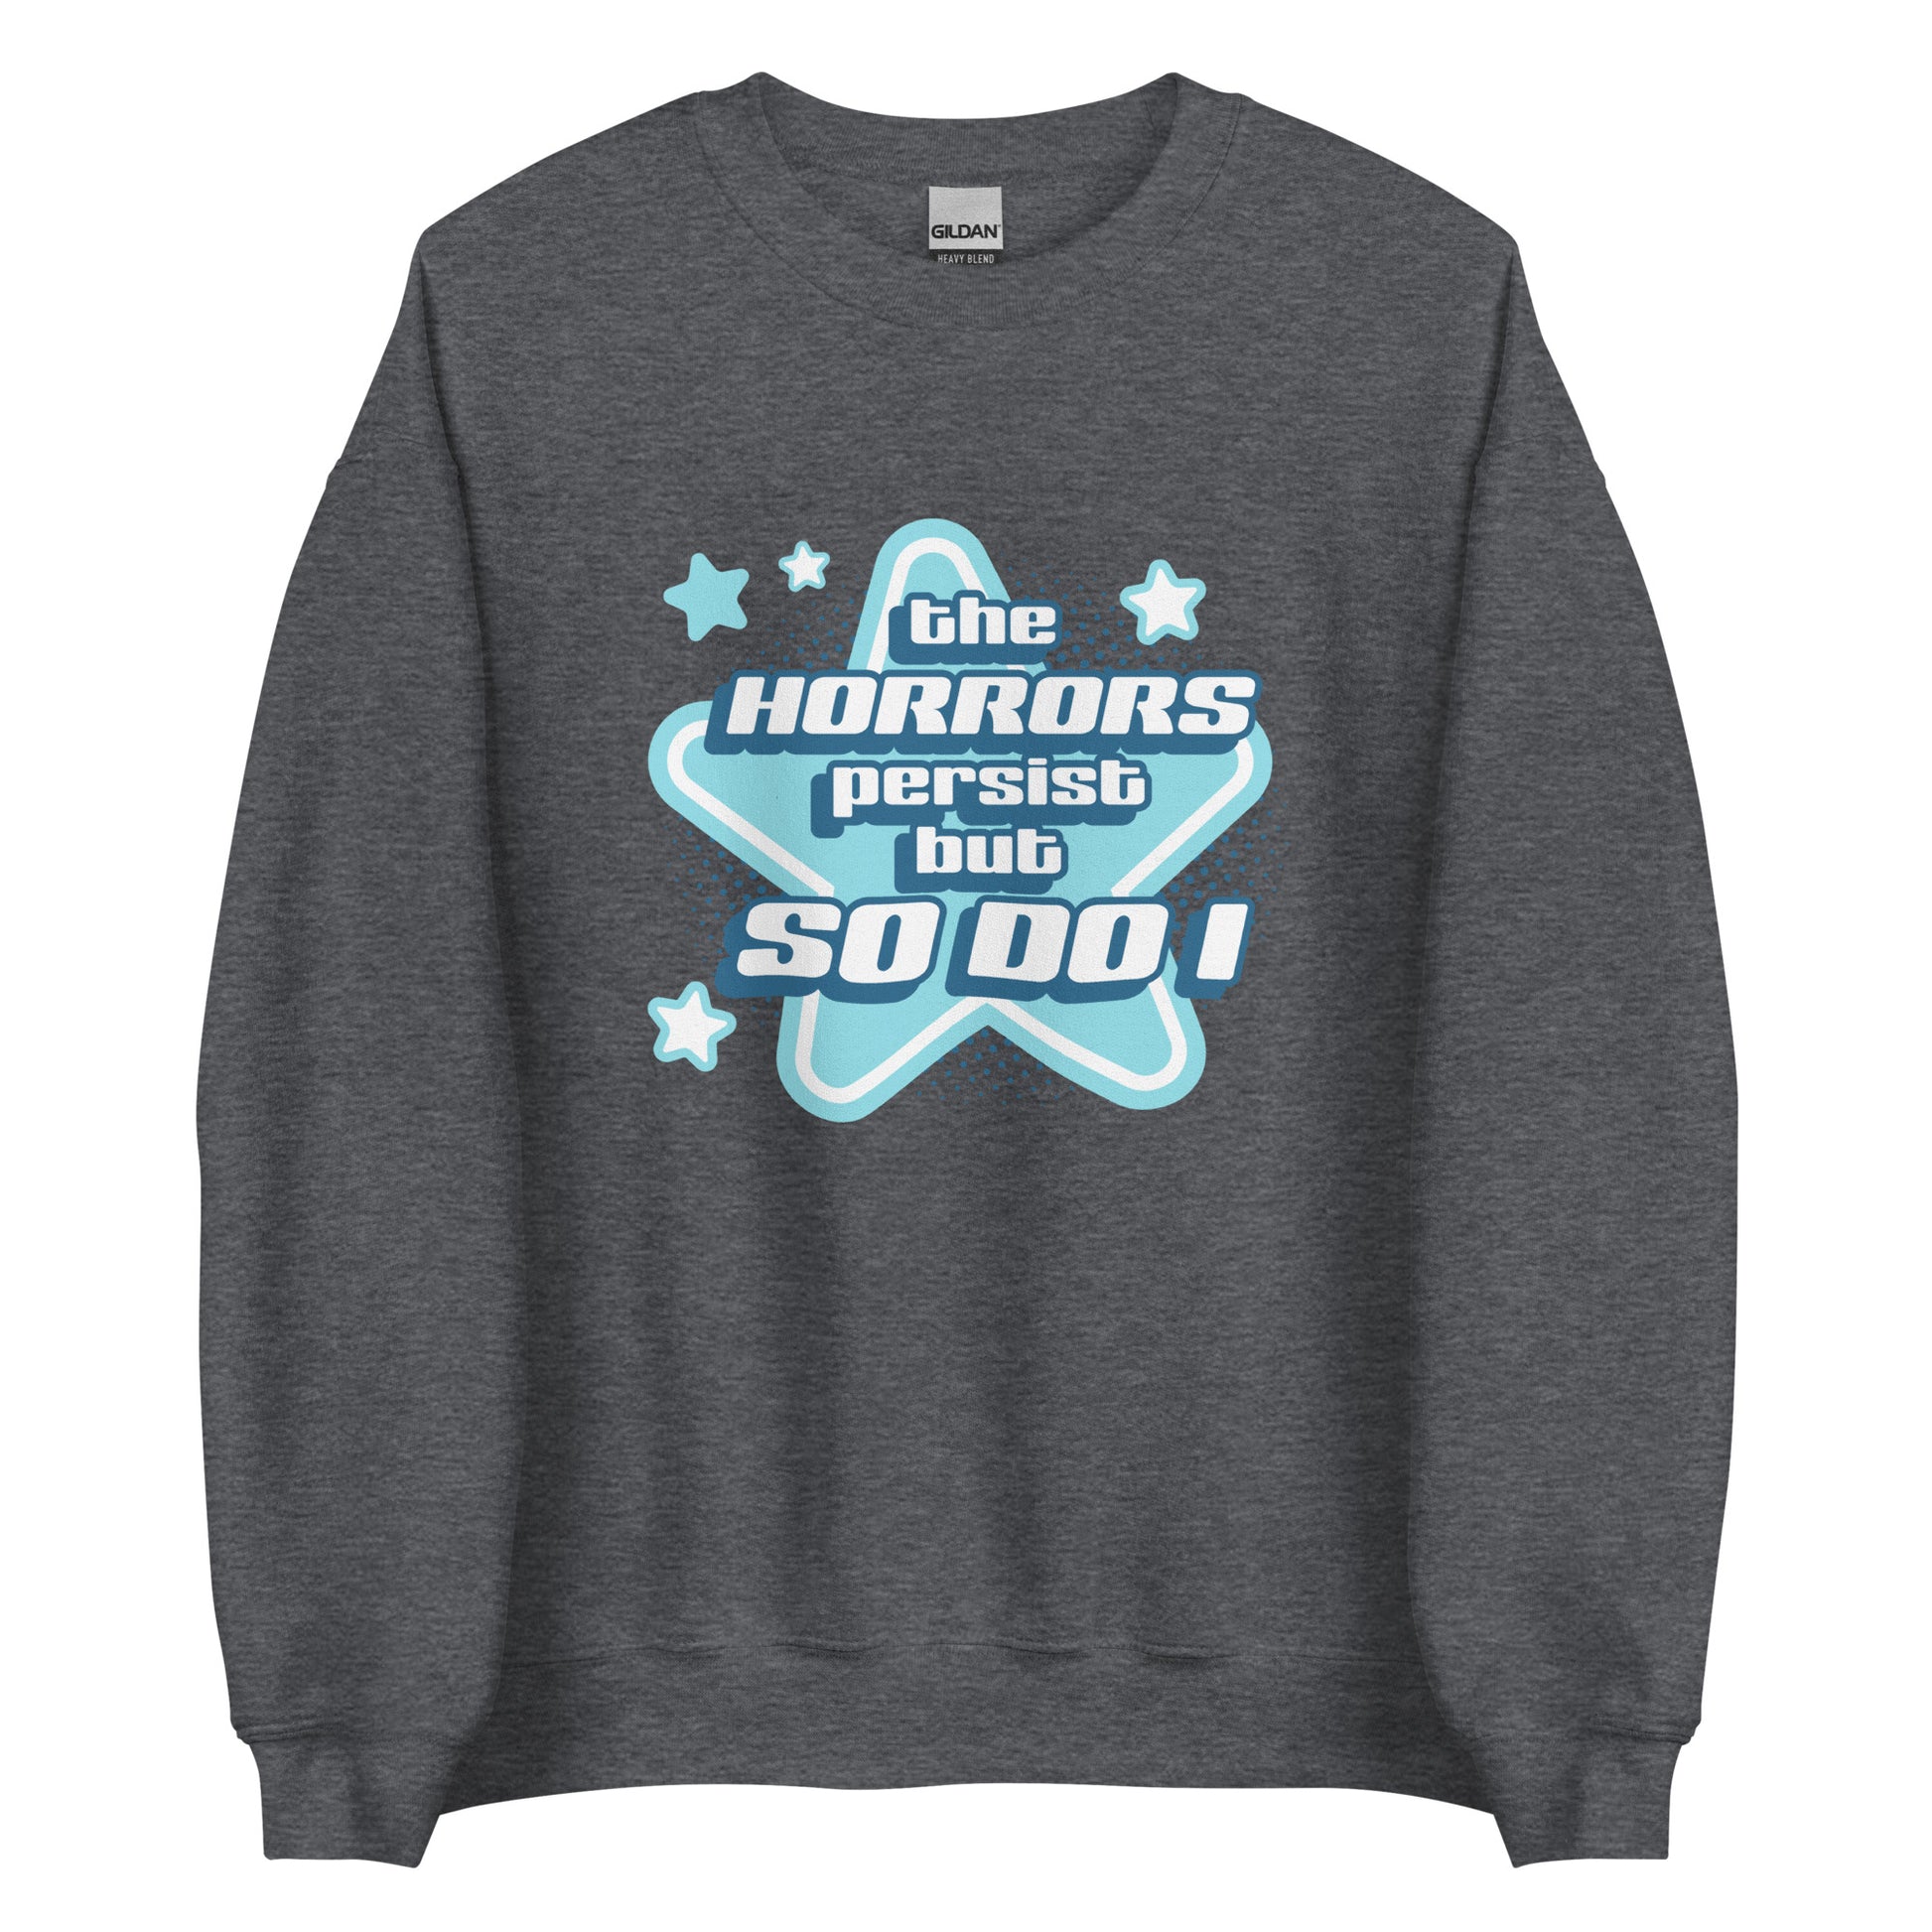 A dark heathered grey crewneck sweatshirt featuring blue and white stars over a halftone pattern with chunky text that reads "the horrors persist but so do i".